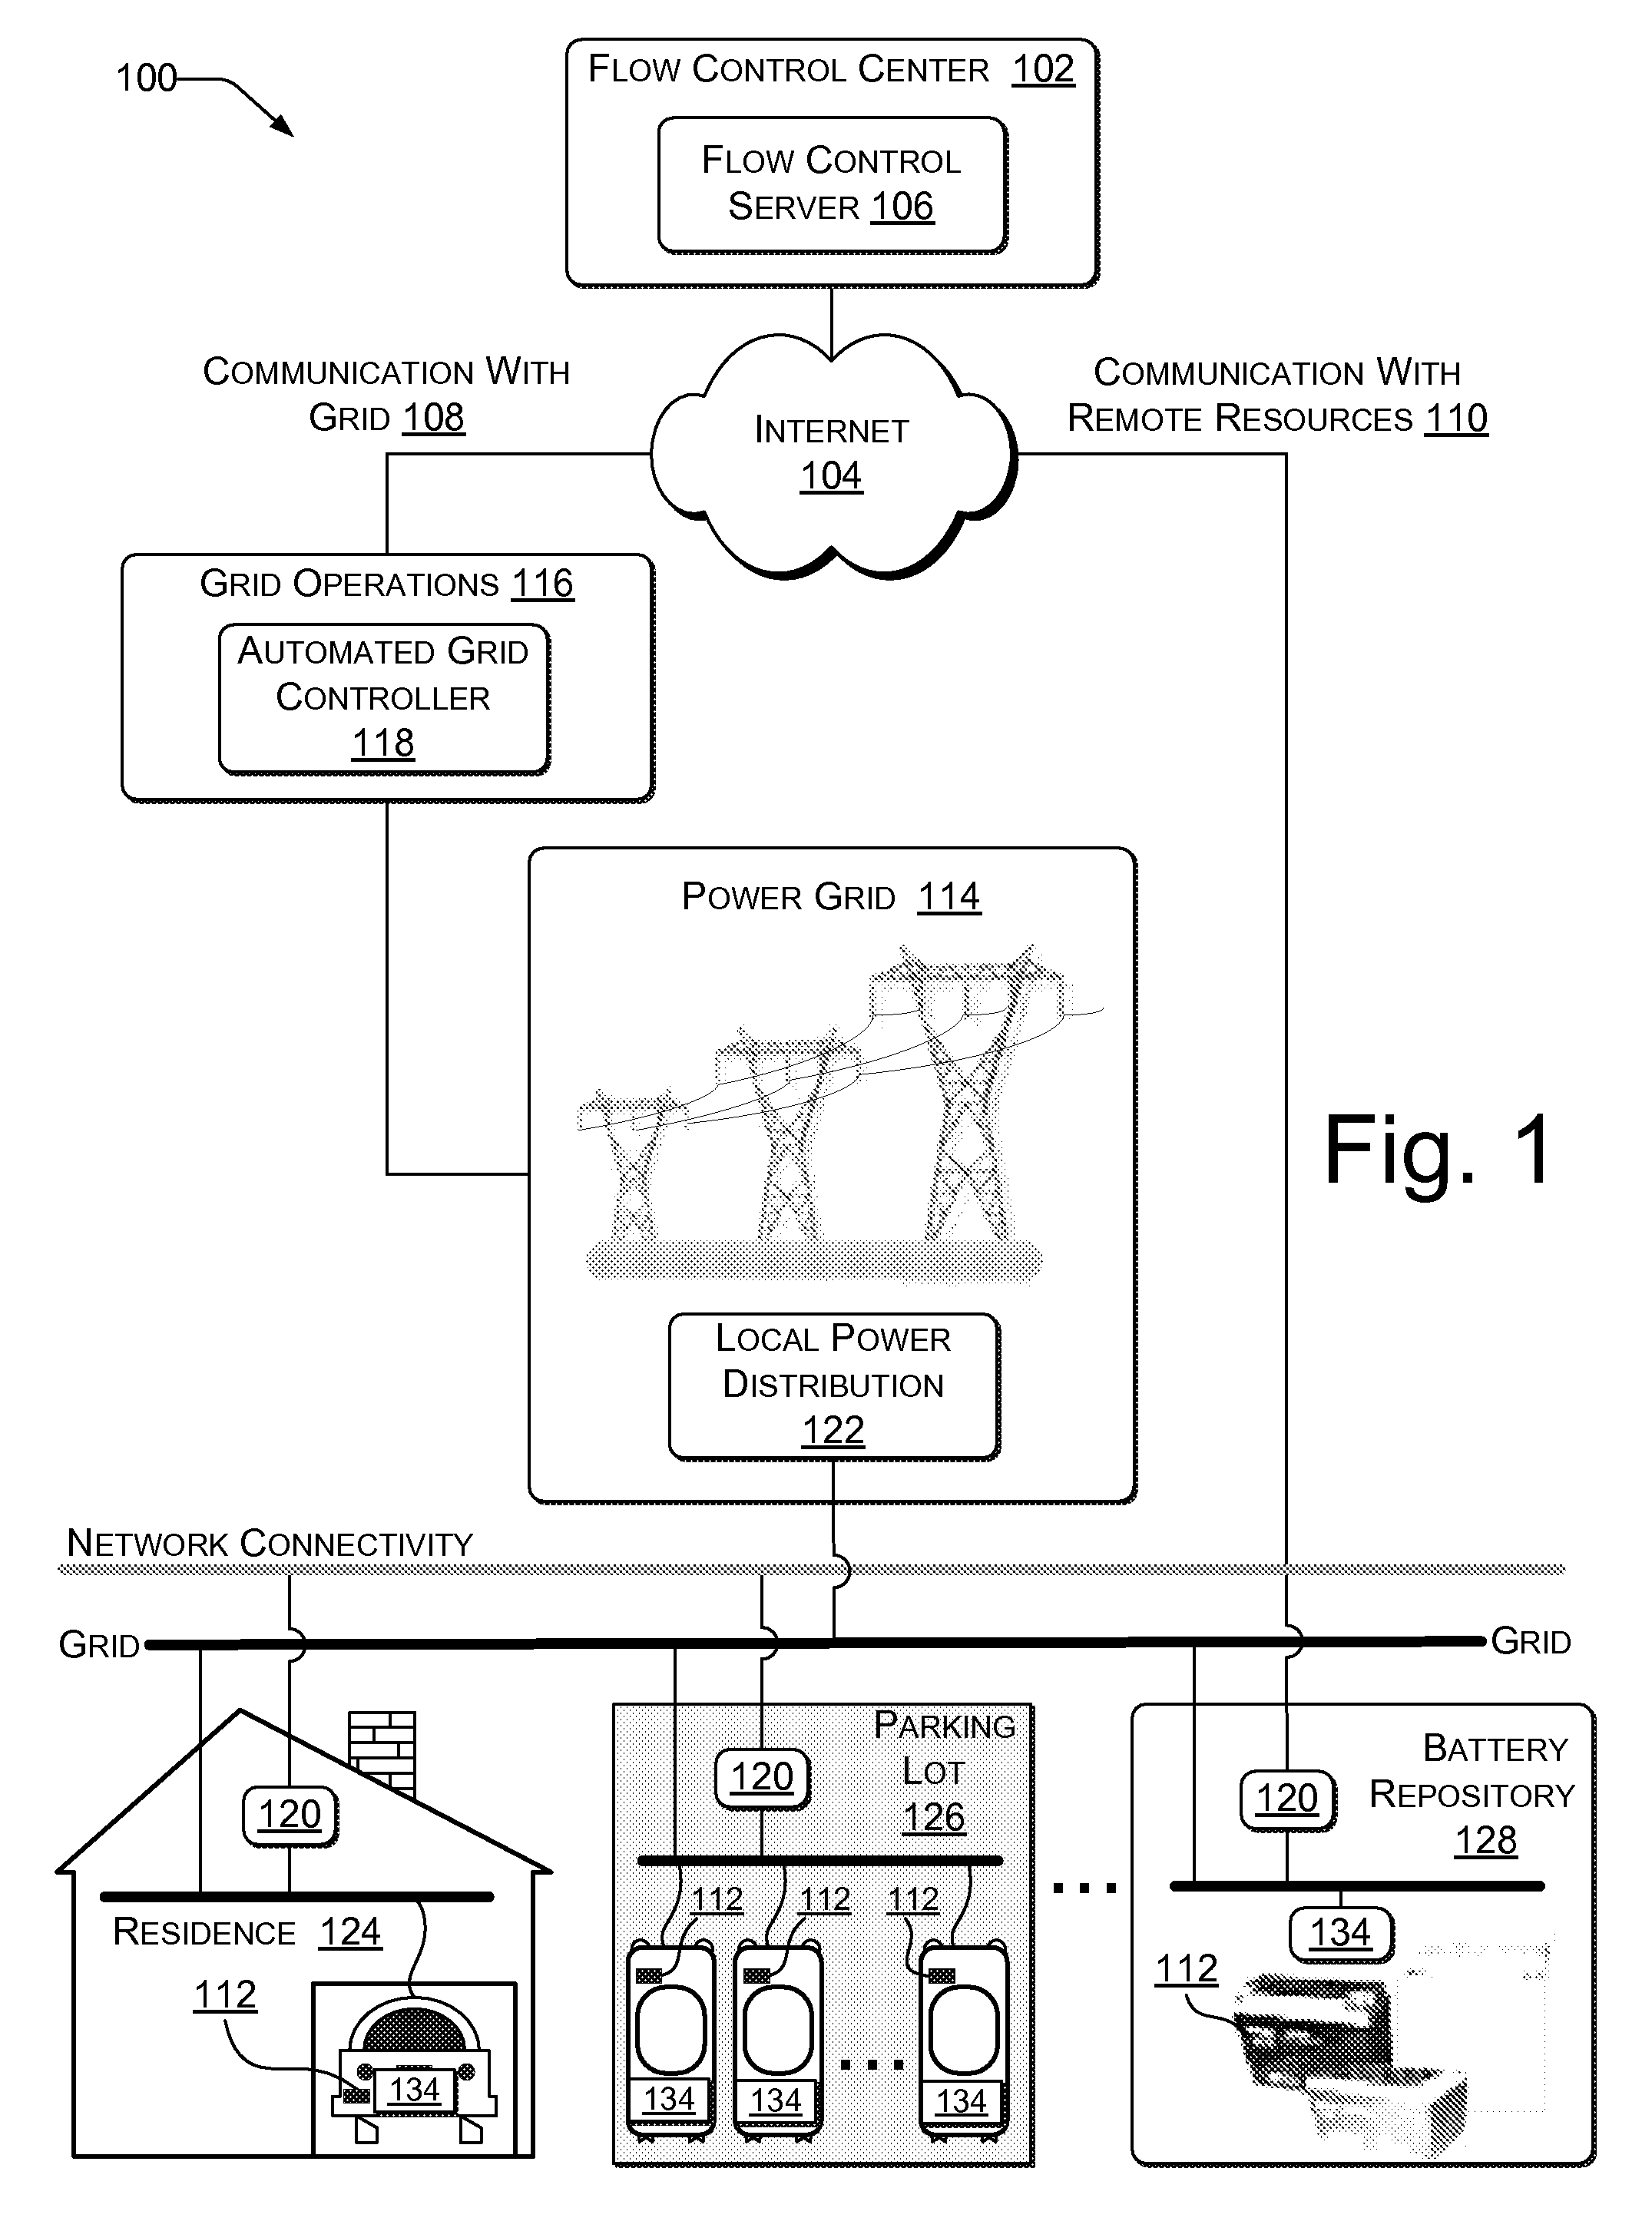 User interface and user control in a power aggregation system for distributed electric resources